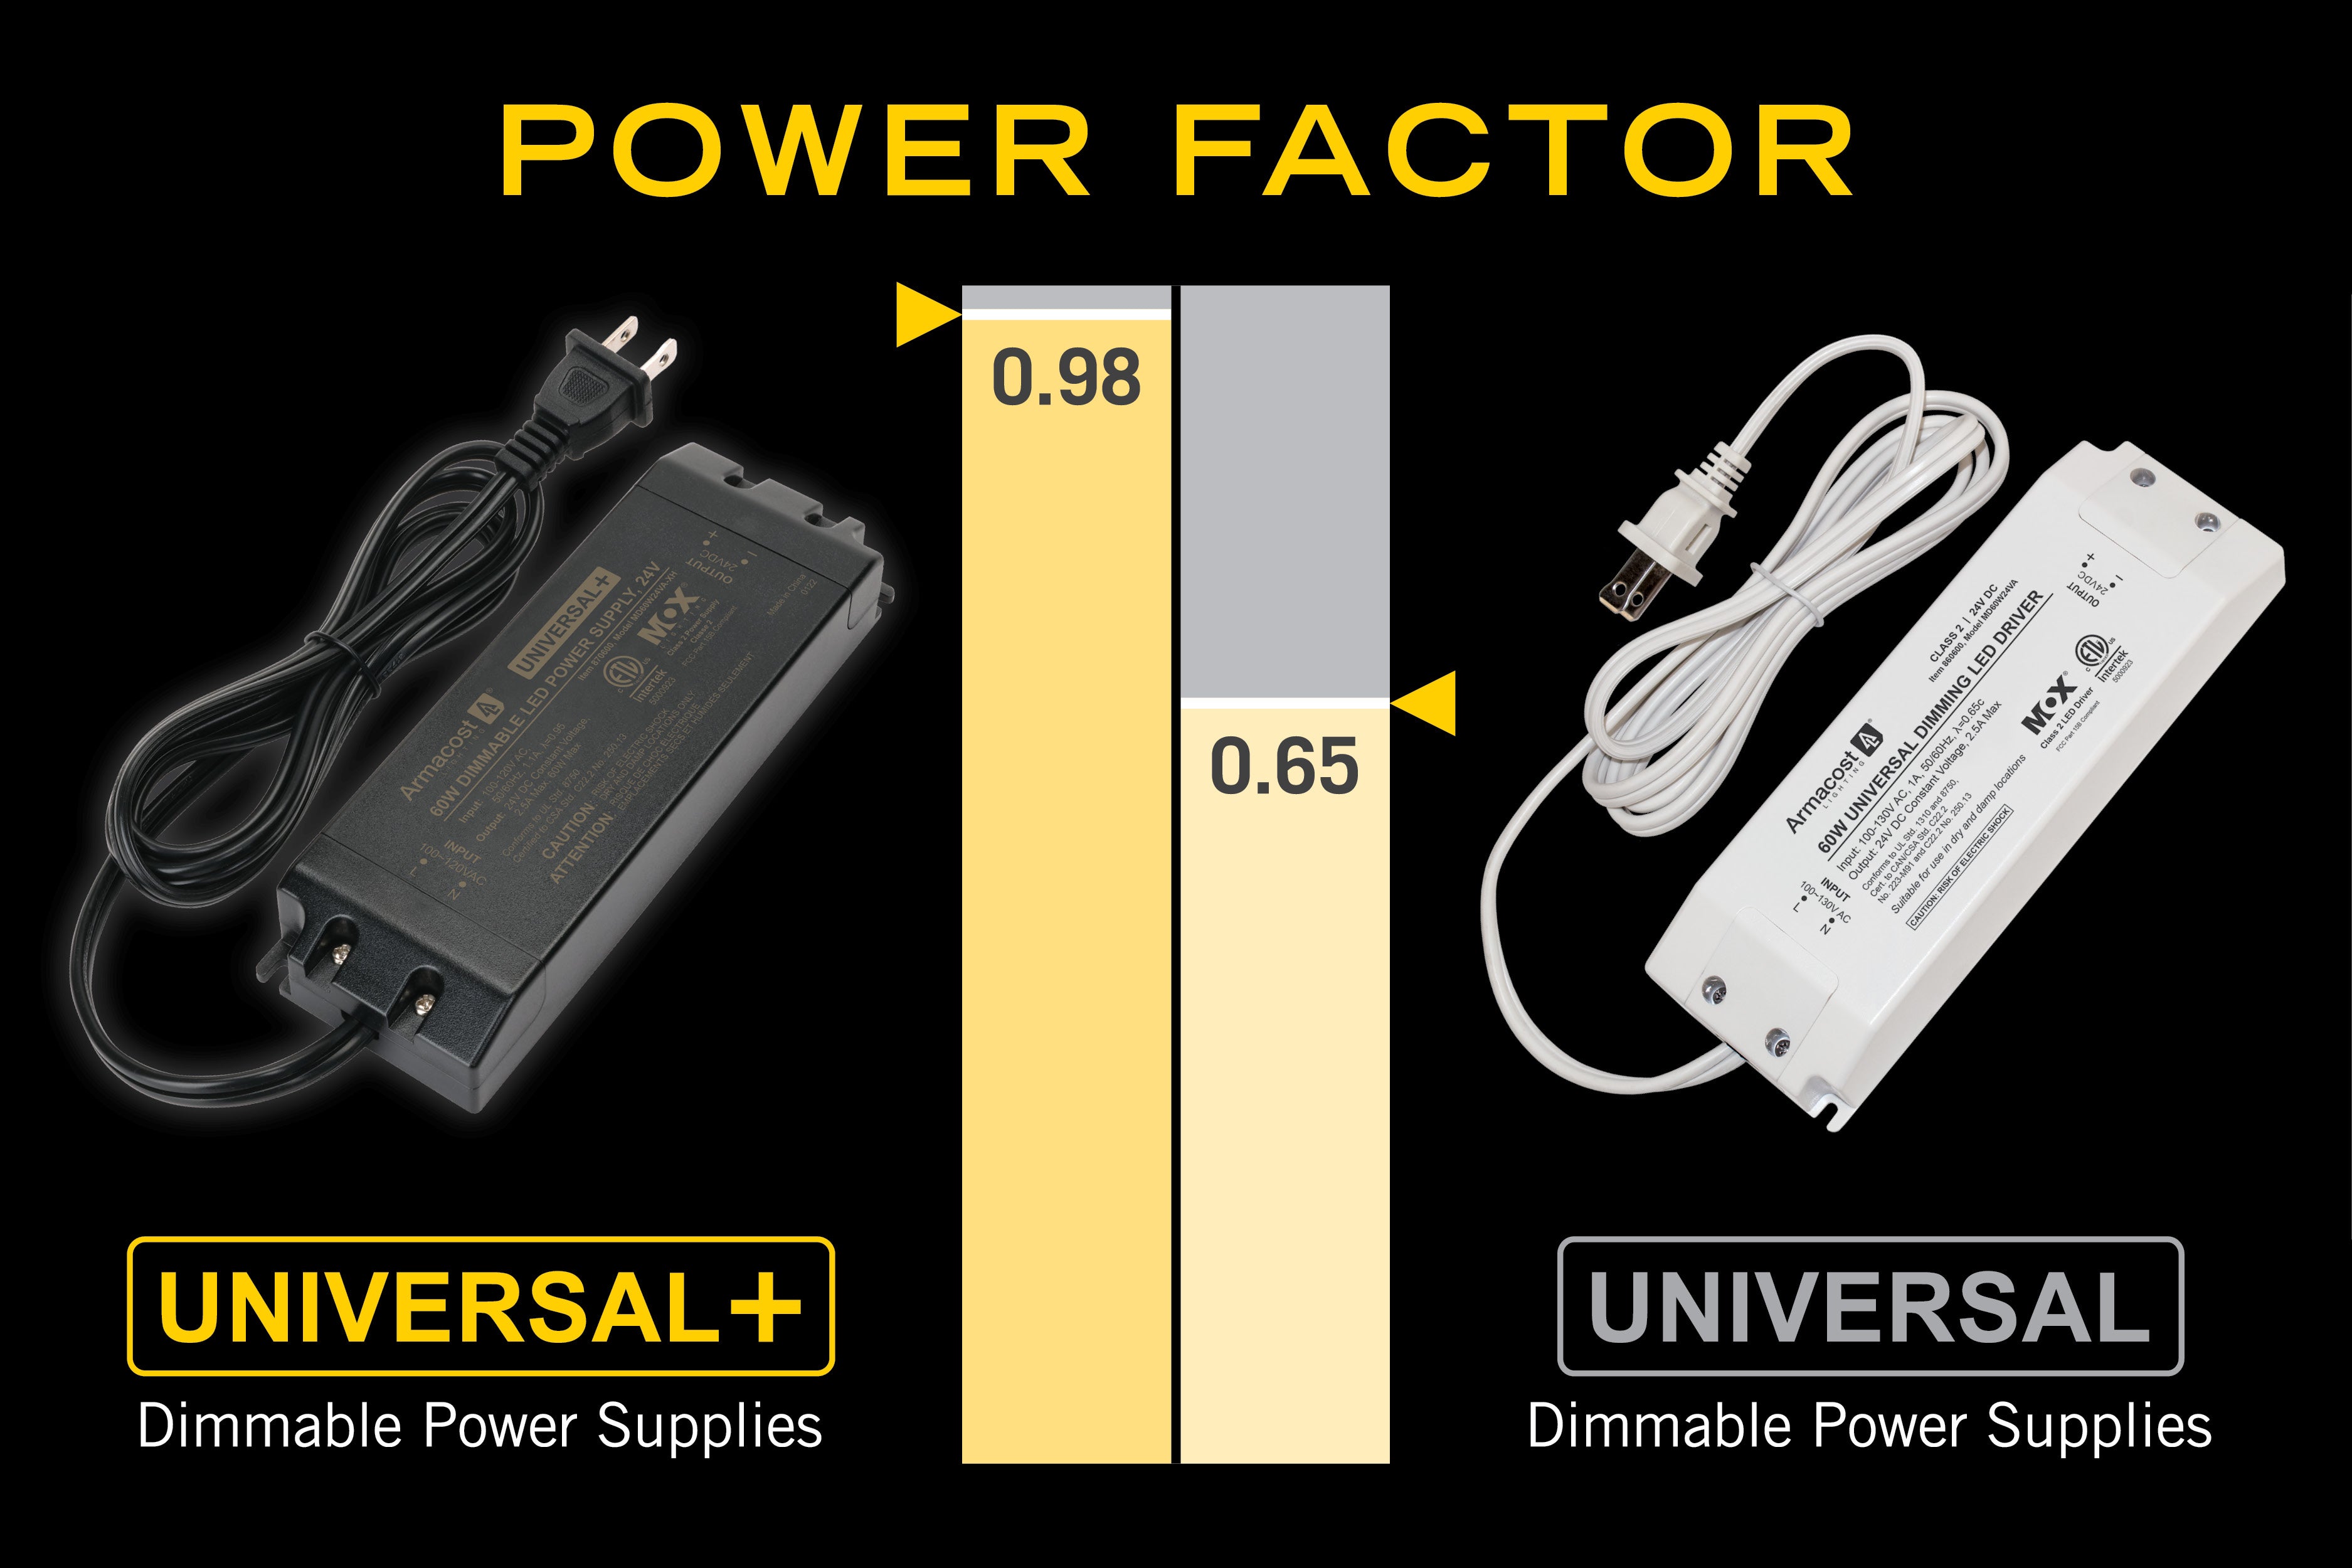 Power factor: Universal + vs. Universal Dimmable Power Supplies